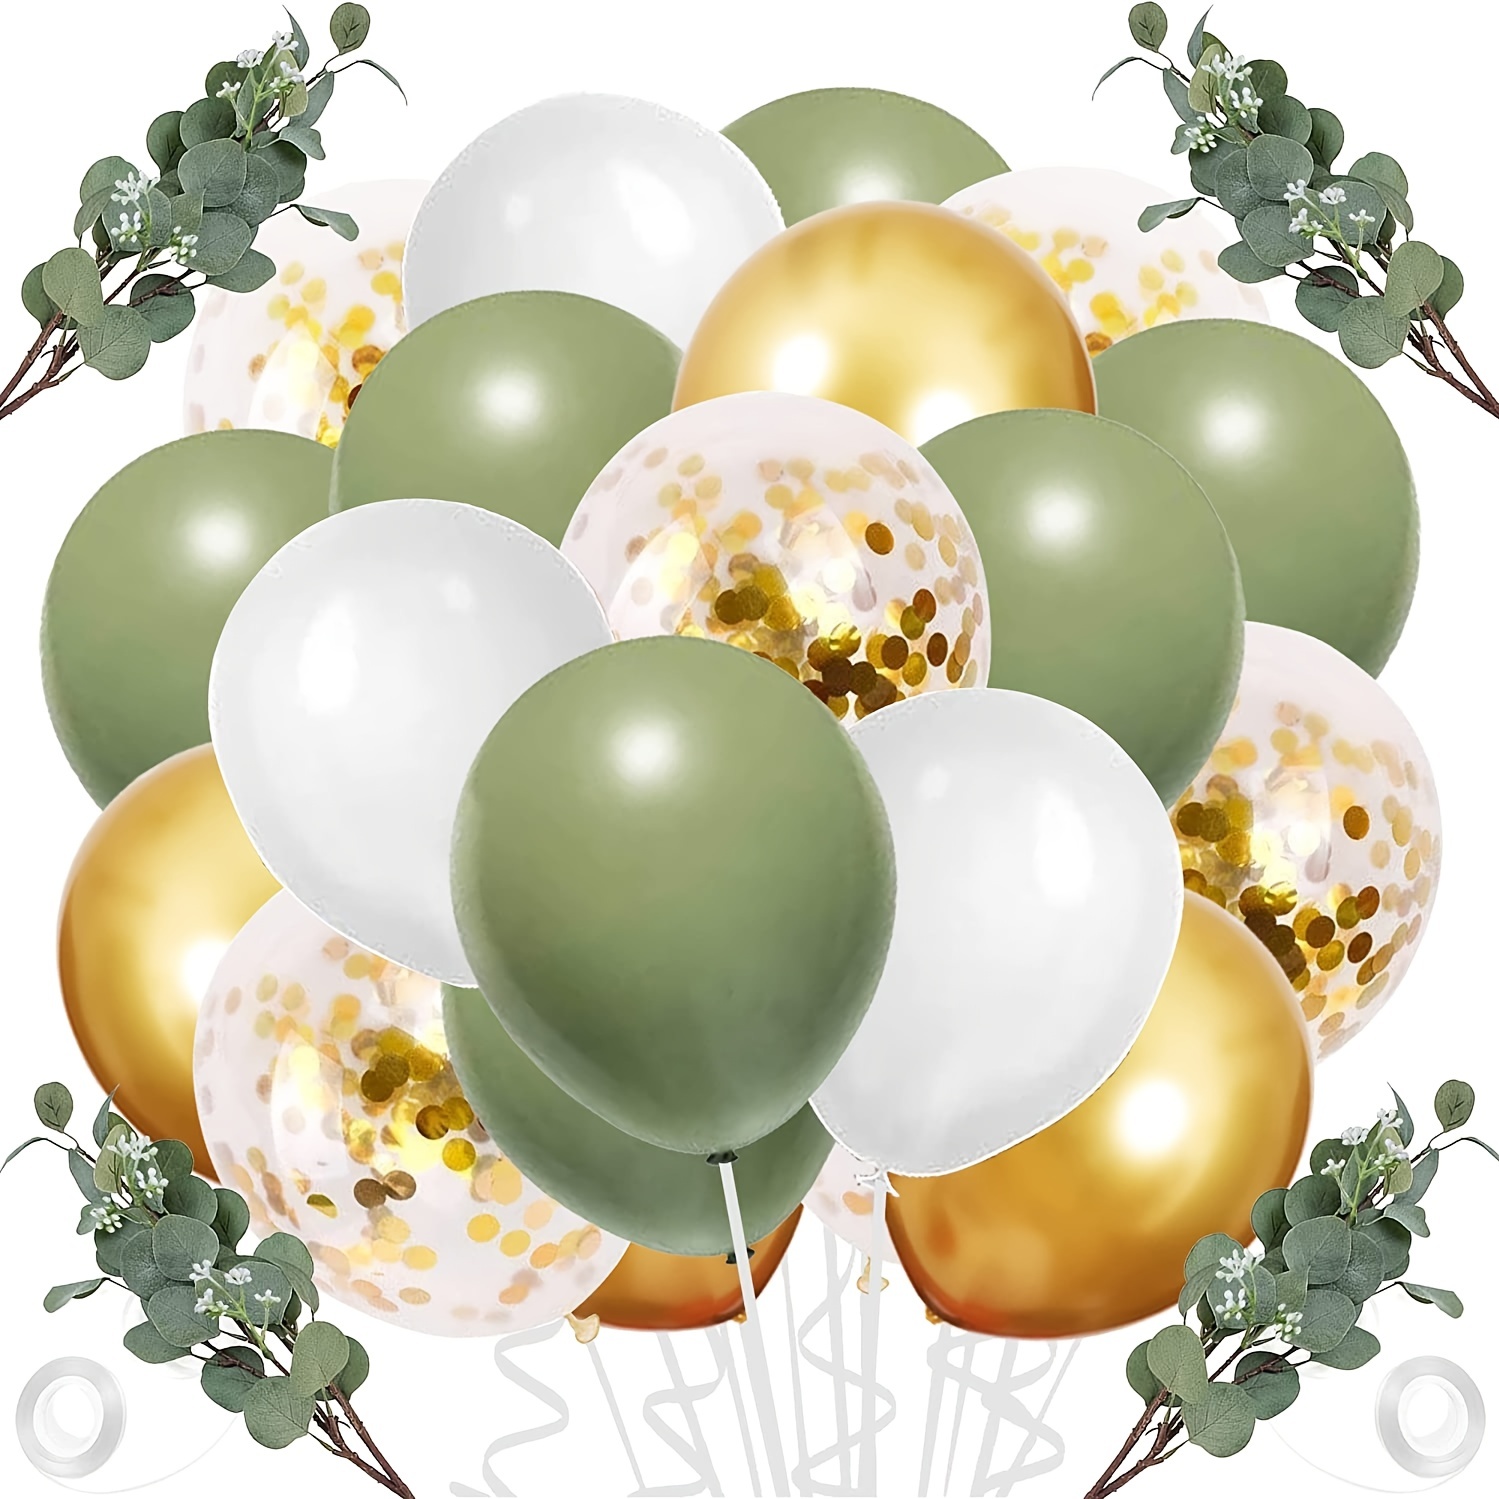 50pcs Balloons Sets for Birthday Party Decoration